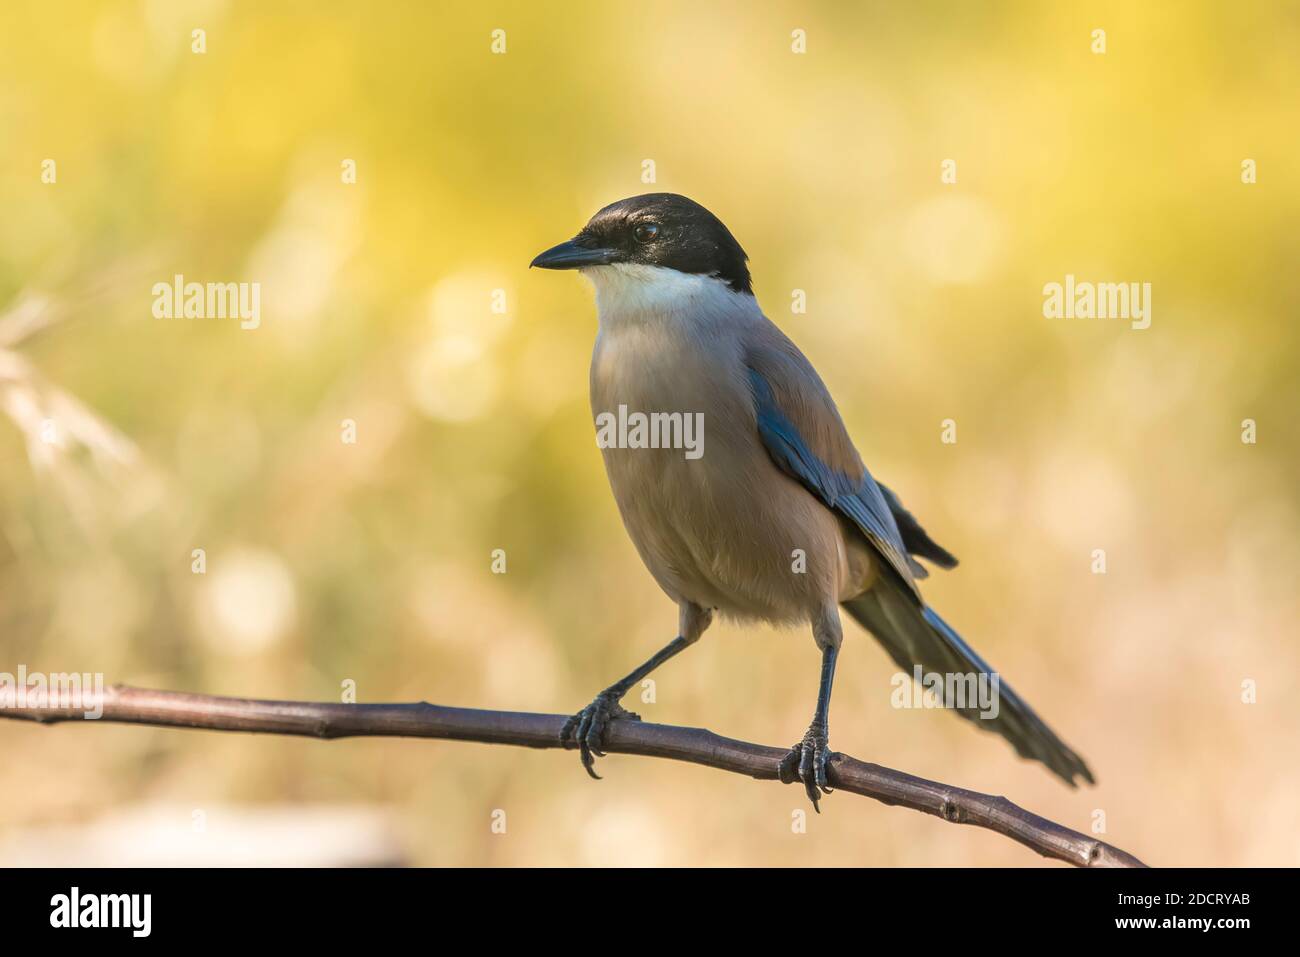 Iberian Magpie perched on a branch with yellow background Stock Photo